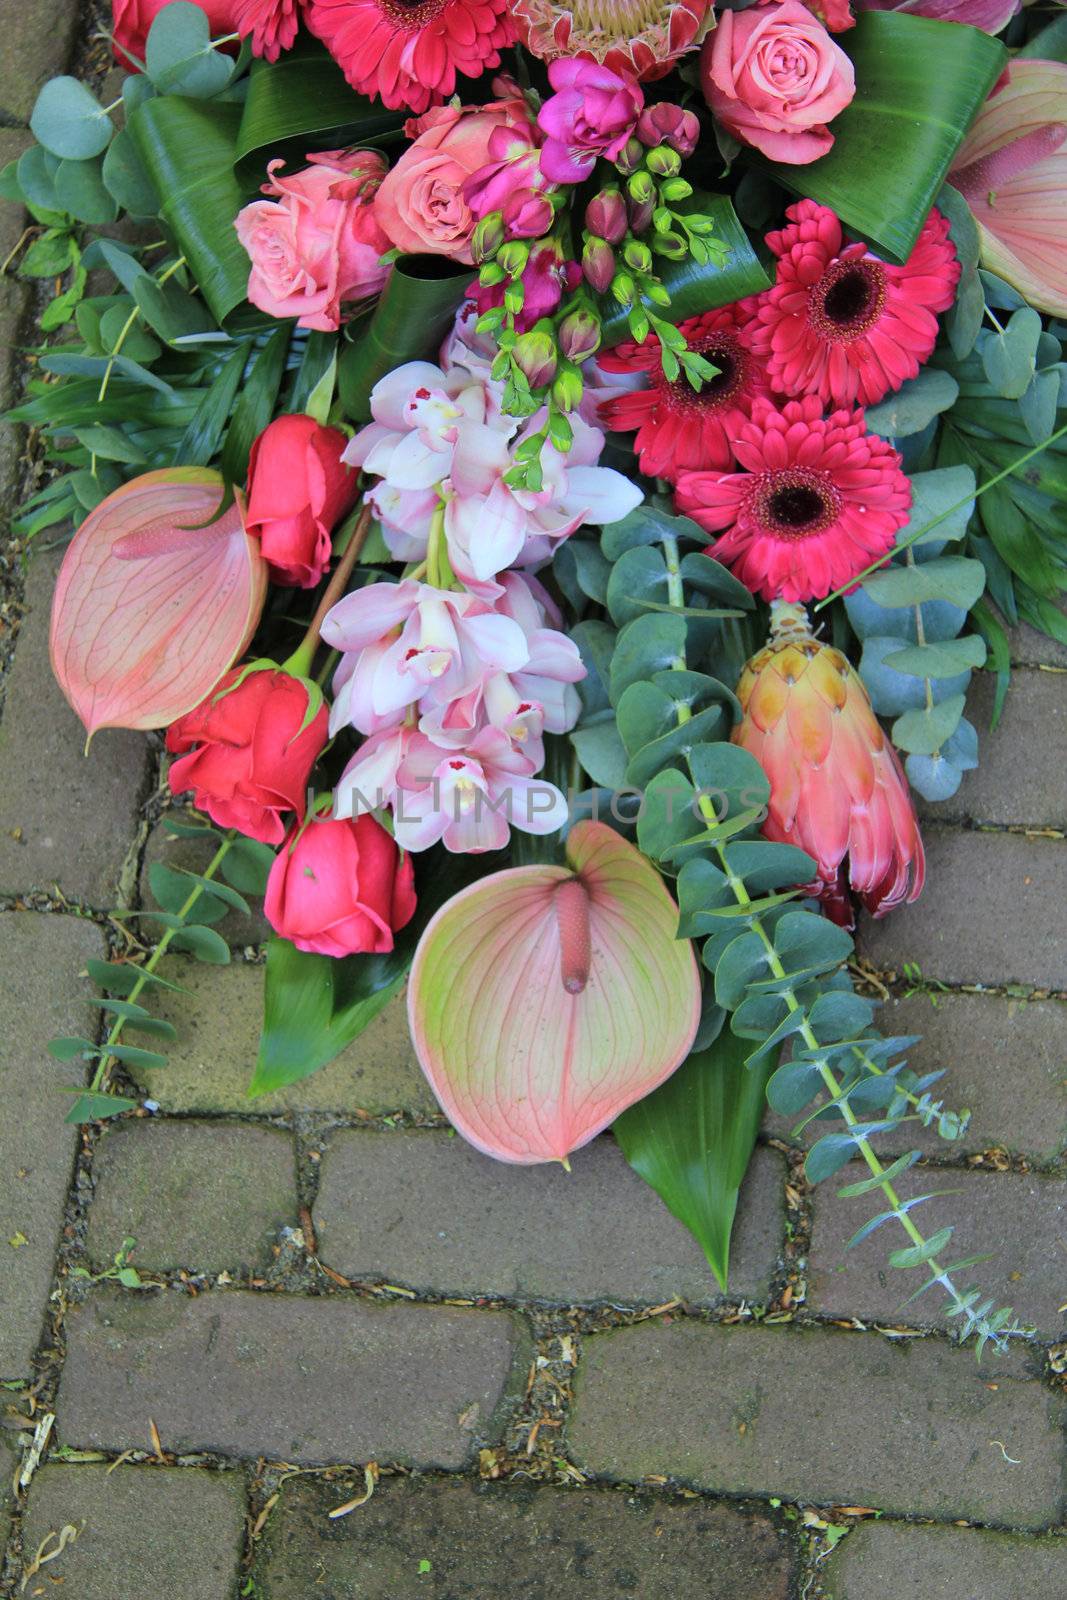 Big sympathy bouquet in different shades of pink on the pavement